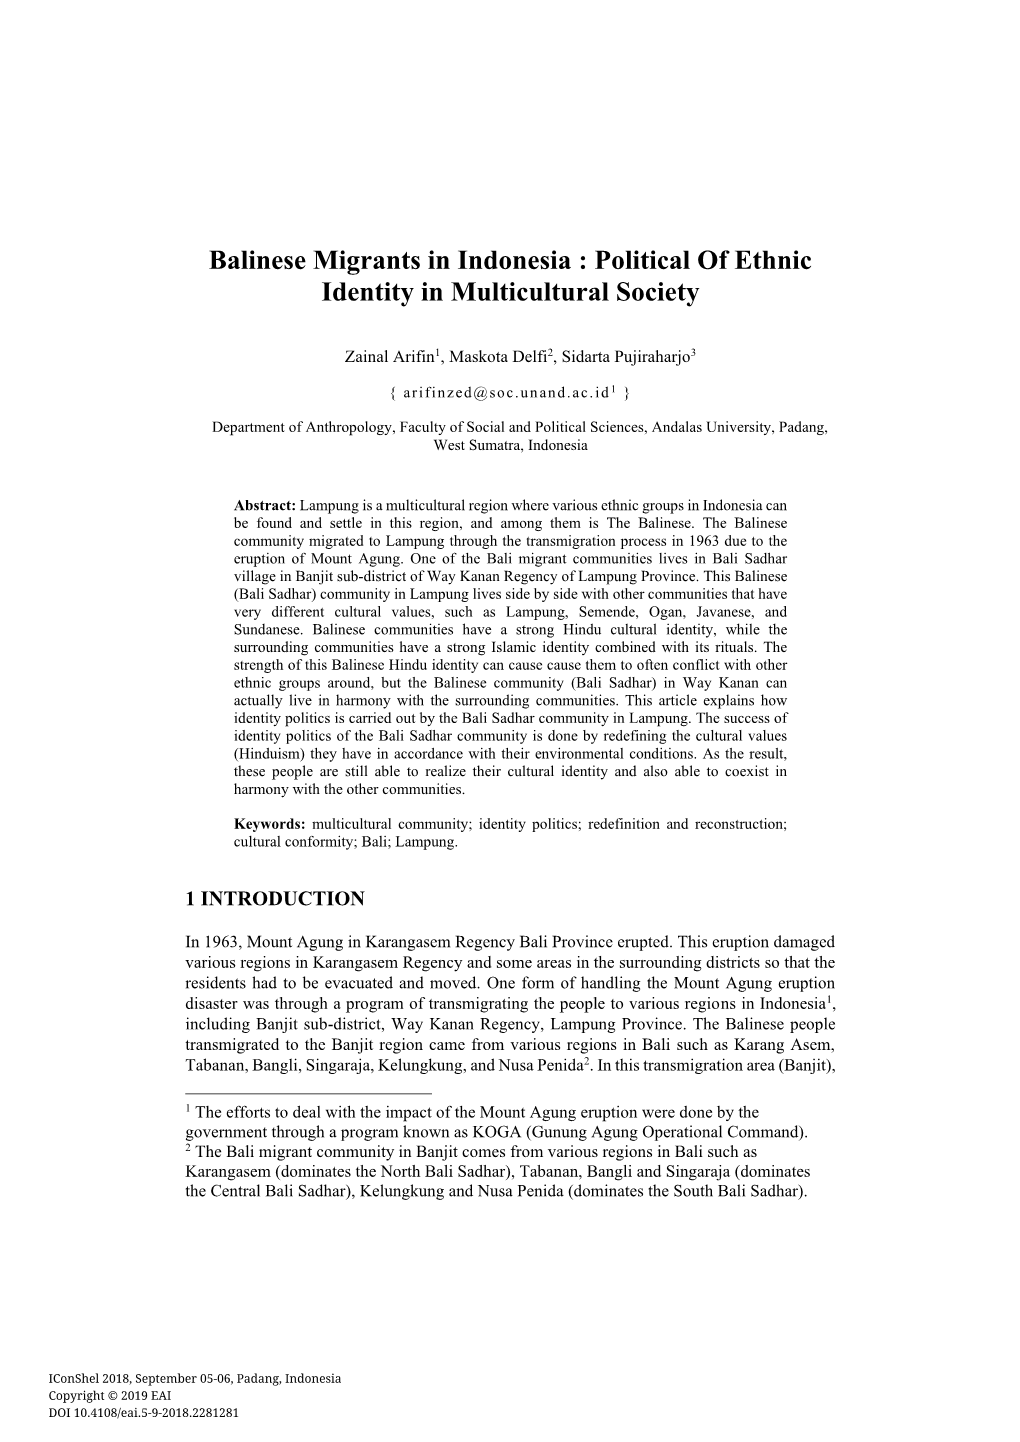 Political of Ethnic Identity in Multicultural Society